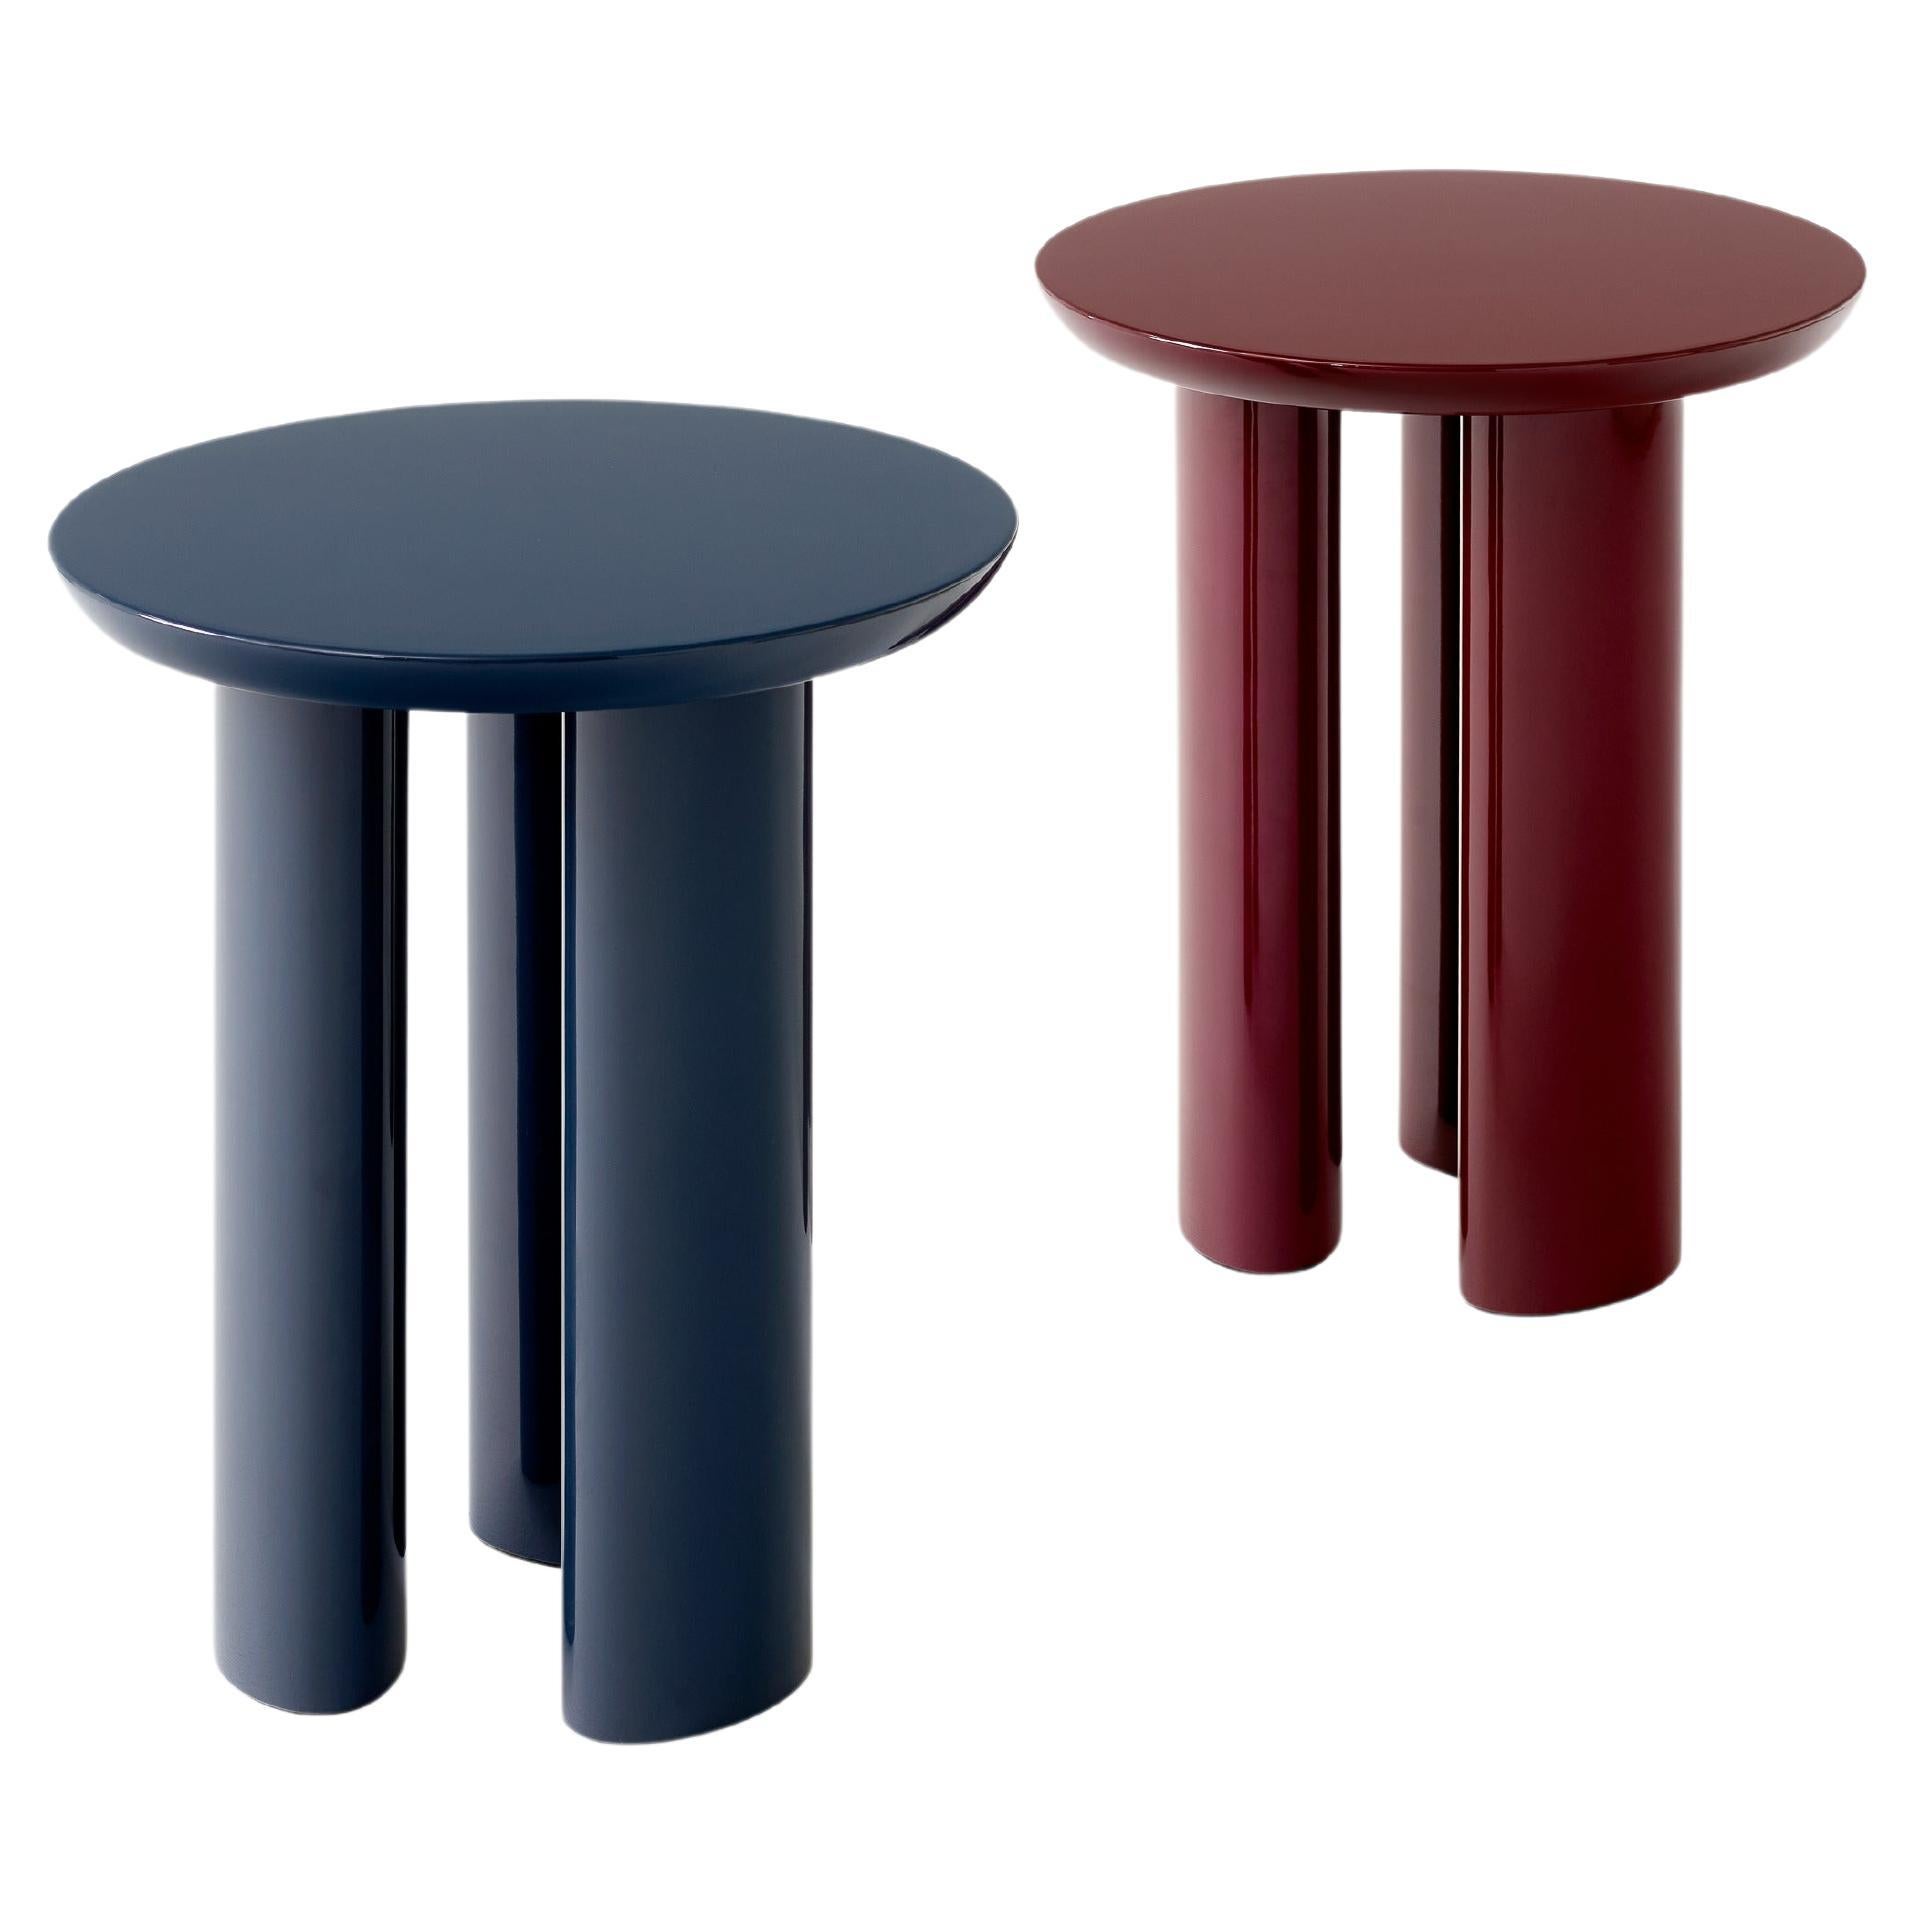 Set of Tung JA3-Burgundy Red & Steel Blue-Side Table, by John Astbury for &T